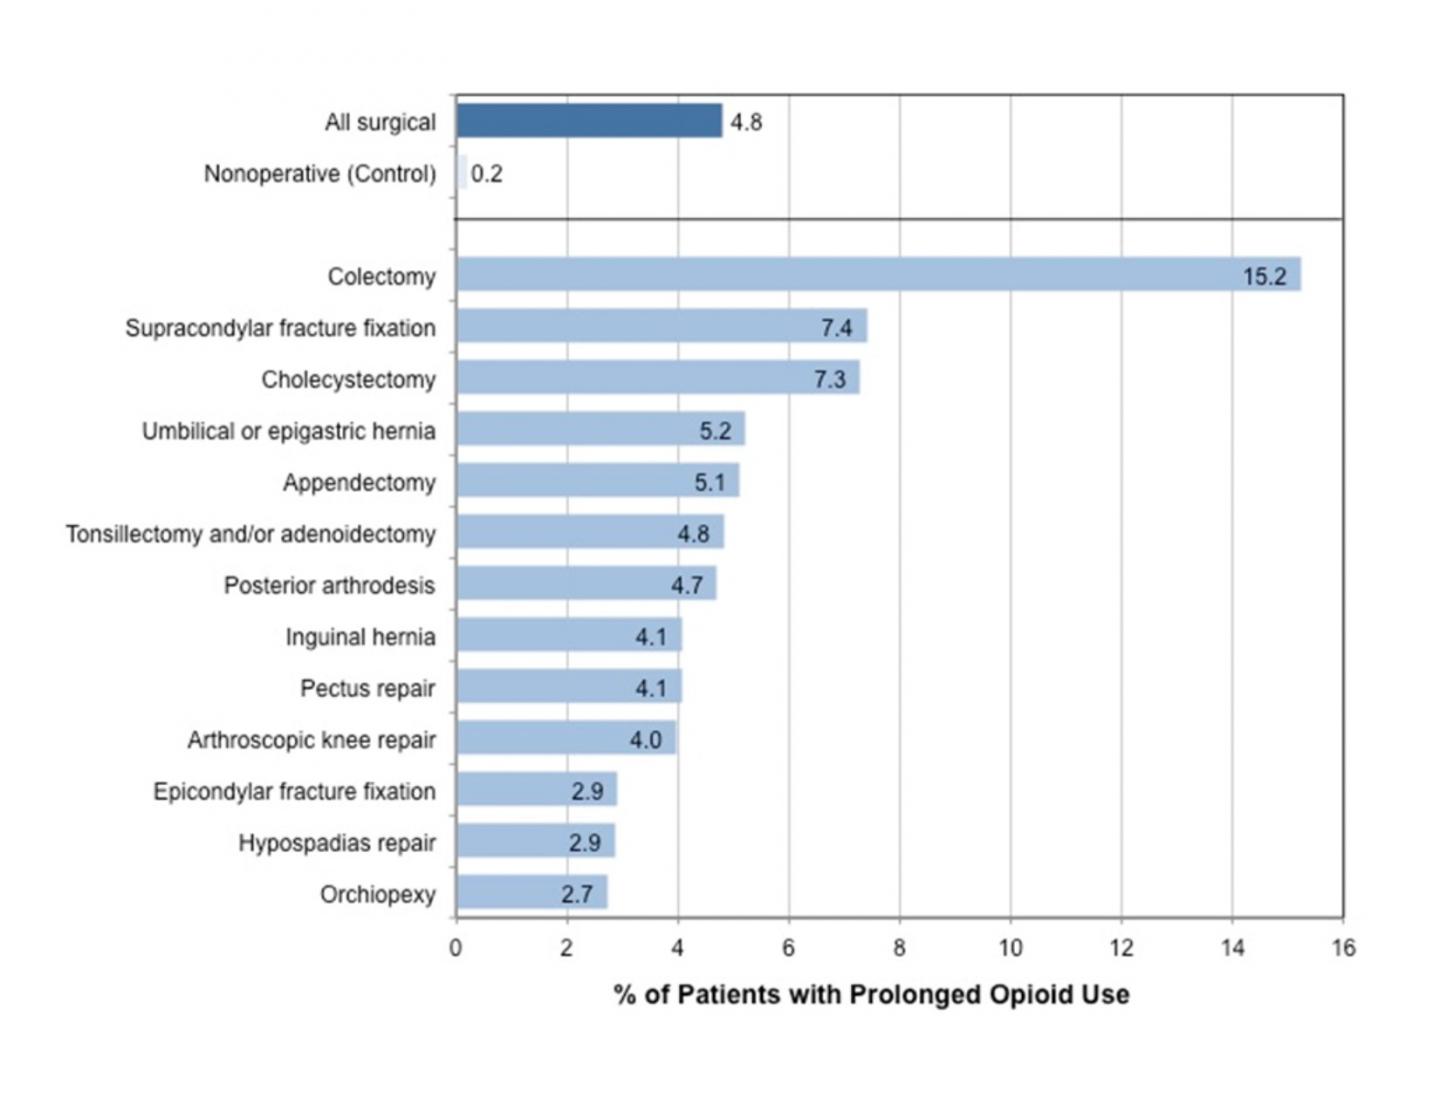 Percentage of Patients with Prolonged Opioid Use